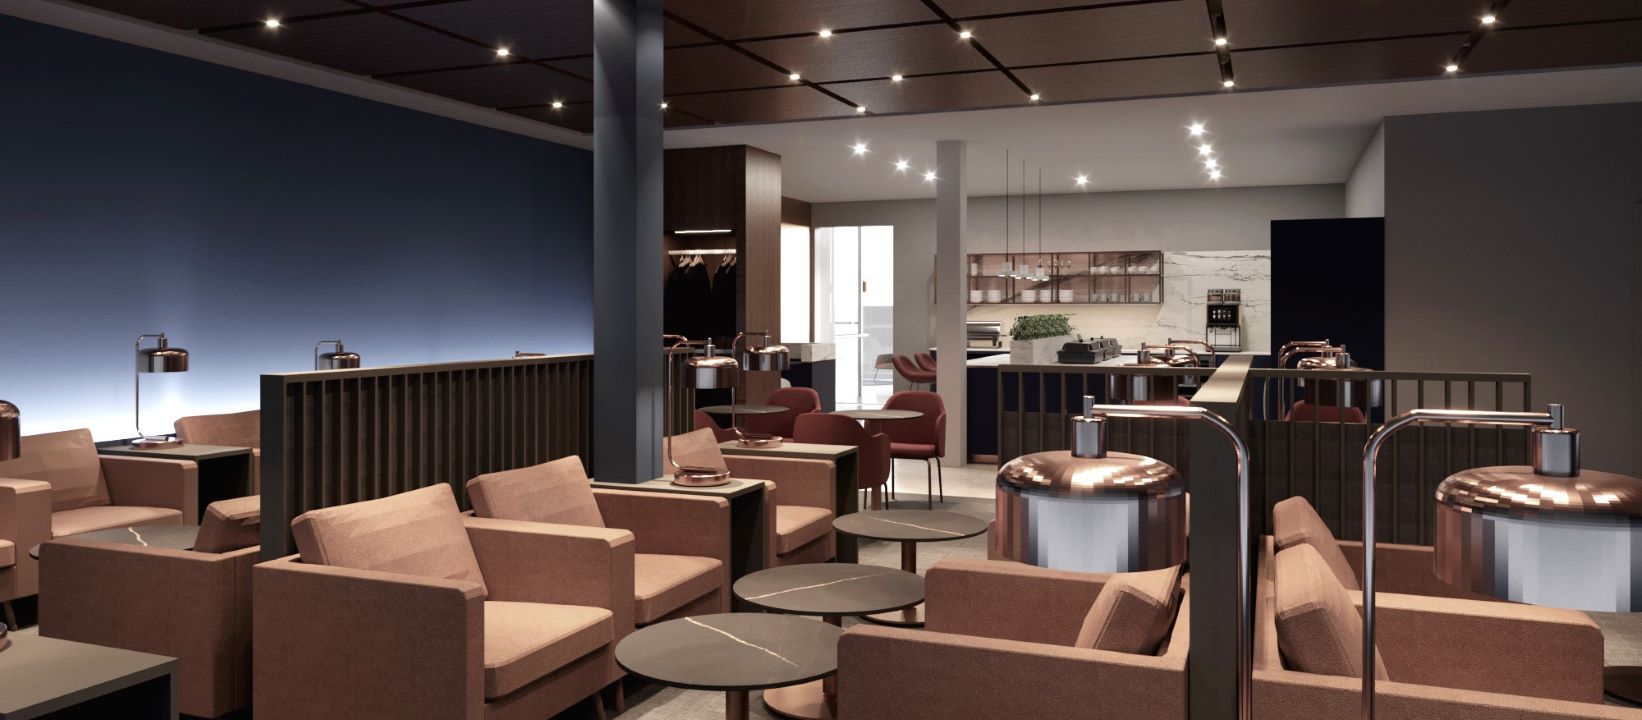 LOT Polish Airlines has embarked on a thorough modernization and expansion project for its Business Lounge in Warsaw.